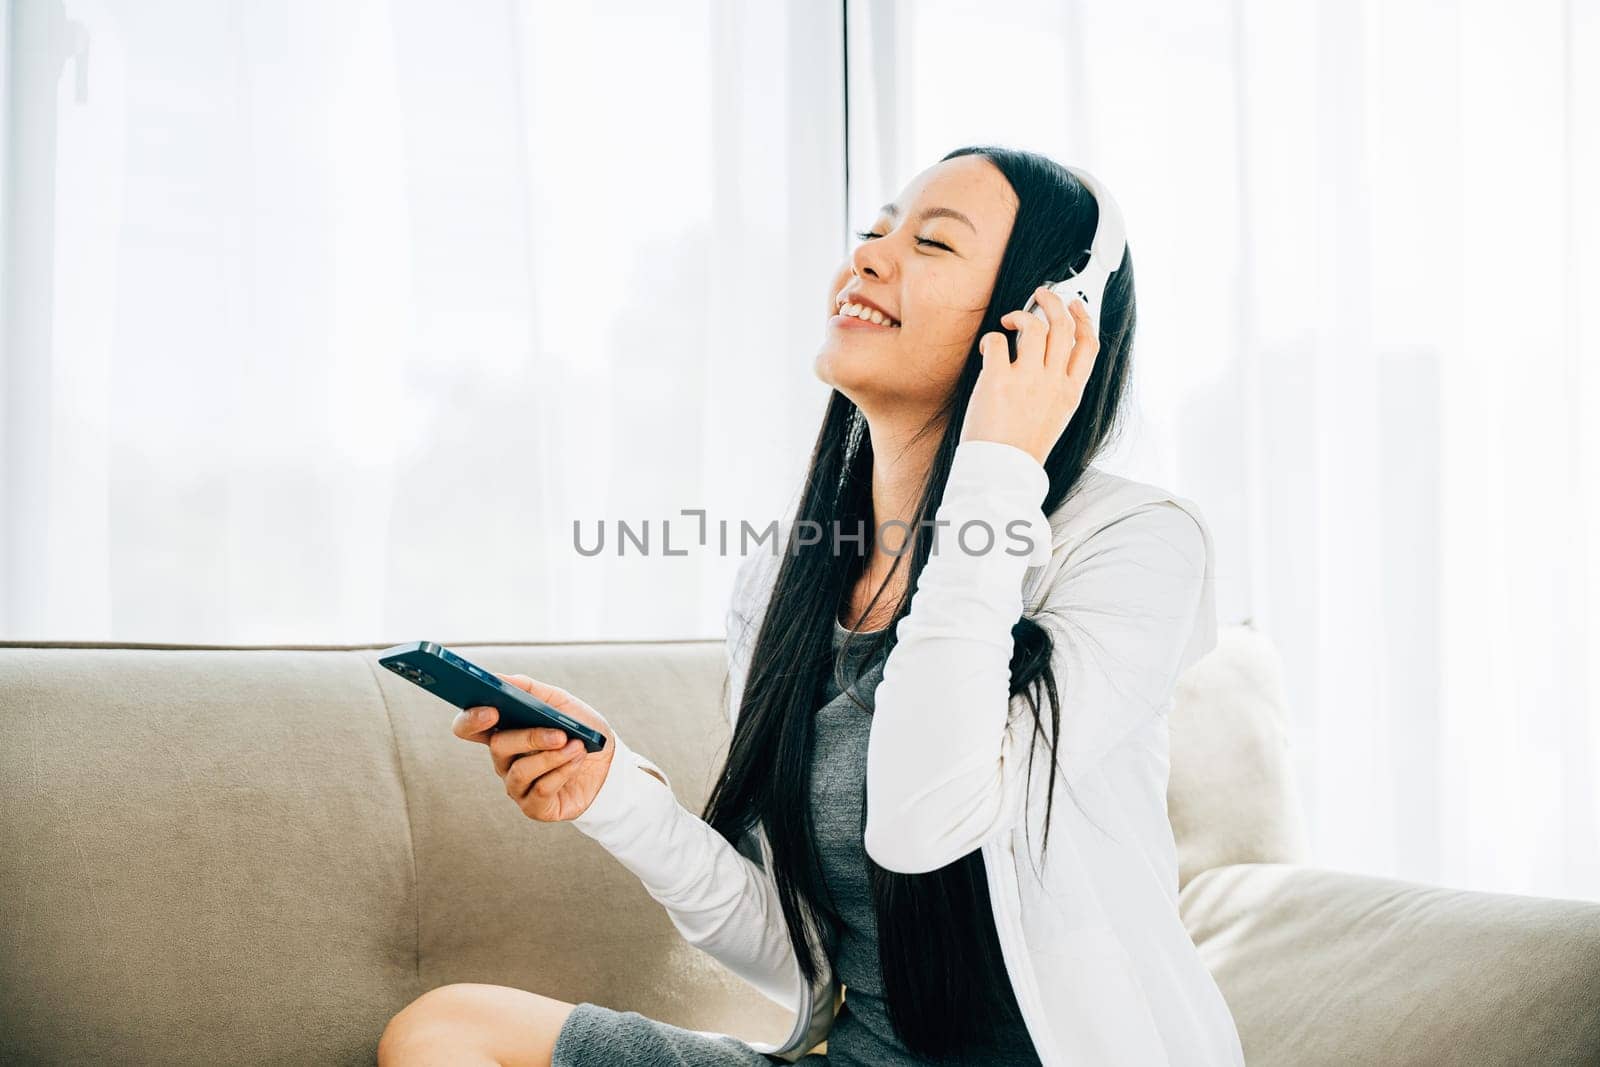 Woman with smartphone and headphones relaxes on sofa listens to music by Sorapop